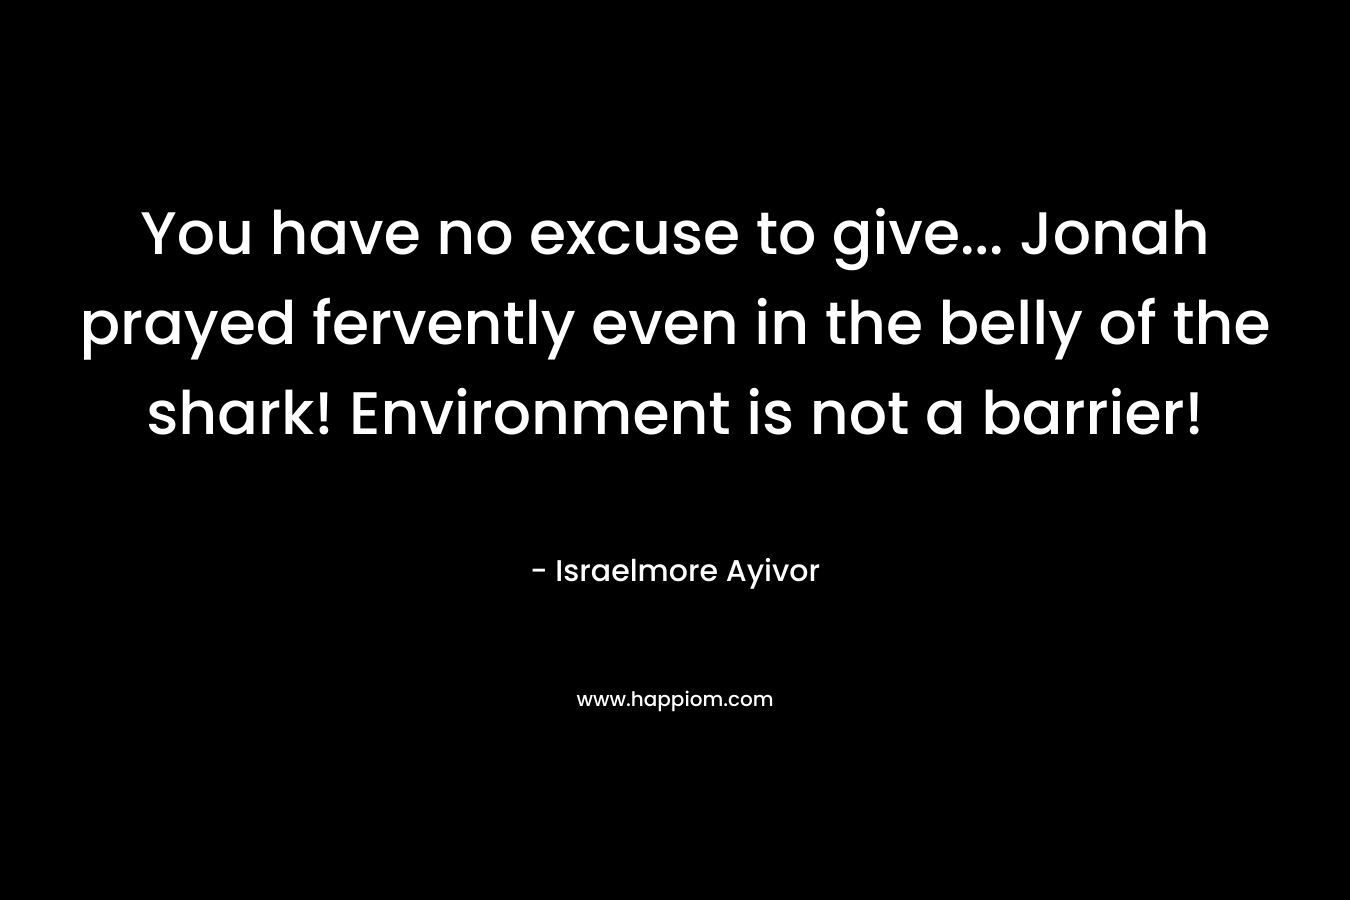 You have no excuse to give... Jonah prayed fervently even in the belly of the shark! Environment is not a barrier!